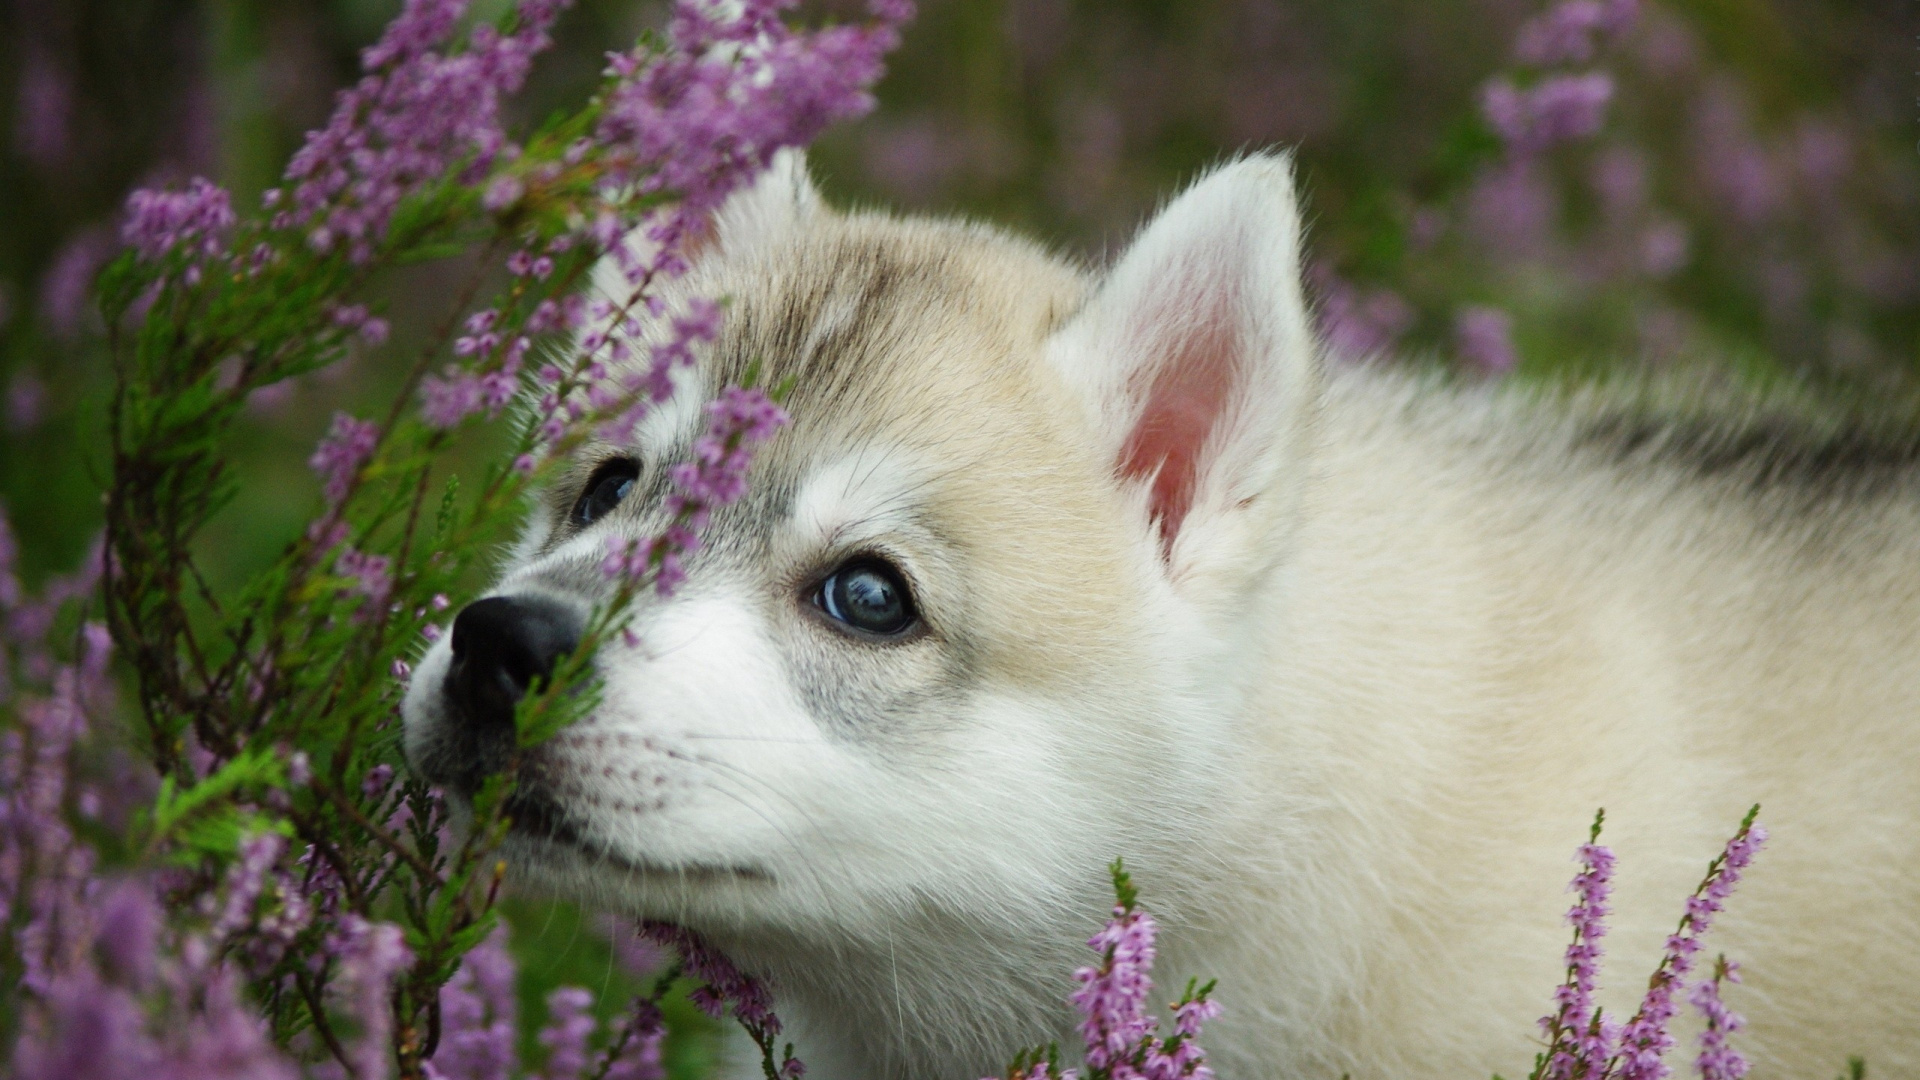 White and Brown Siberian Husky Puppy on Purple Flower Field During Daytime. Wallpaper in 1920x1080 Resolution